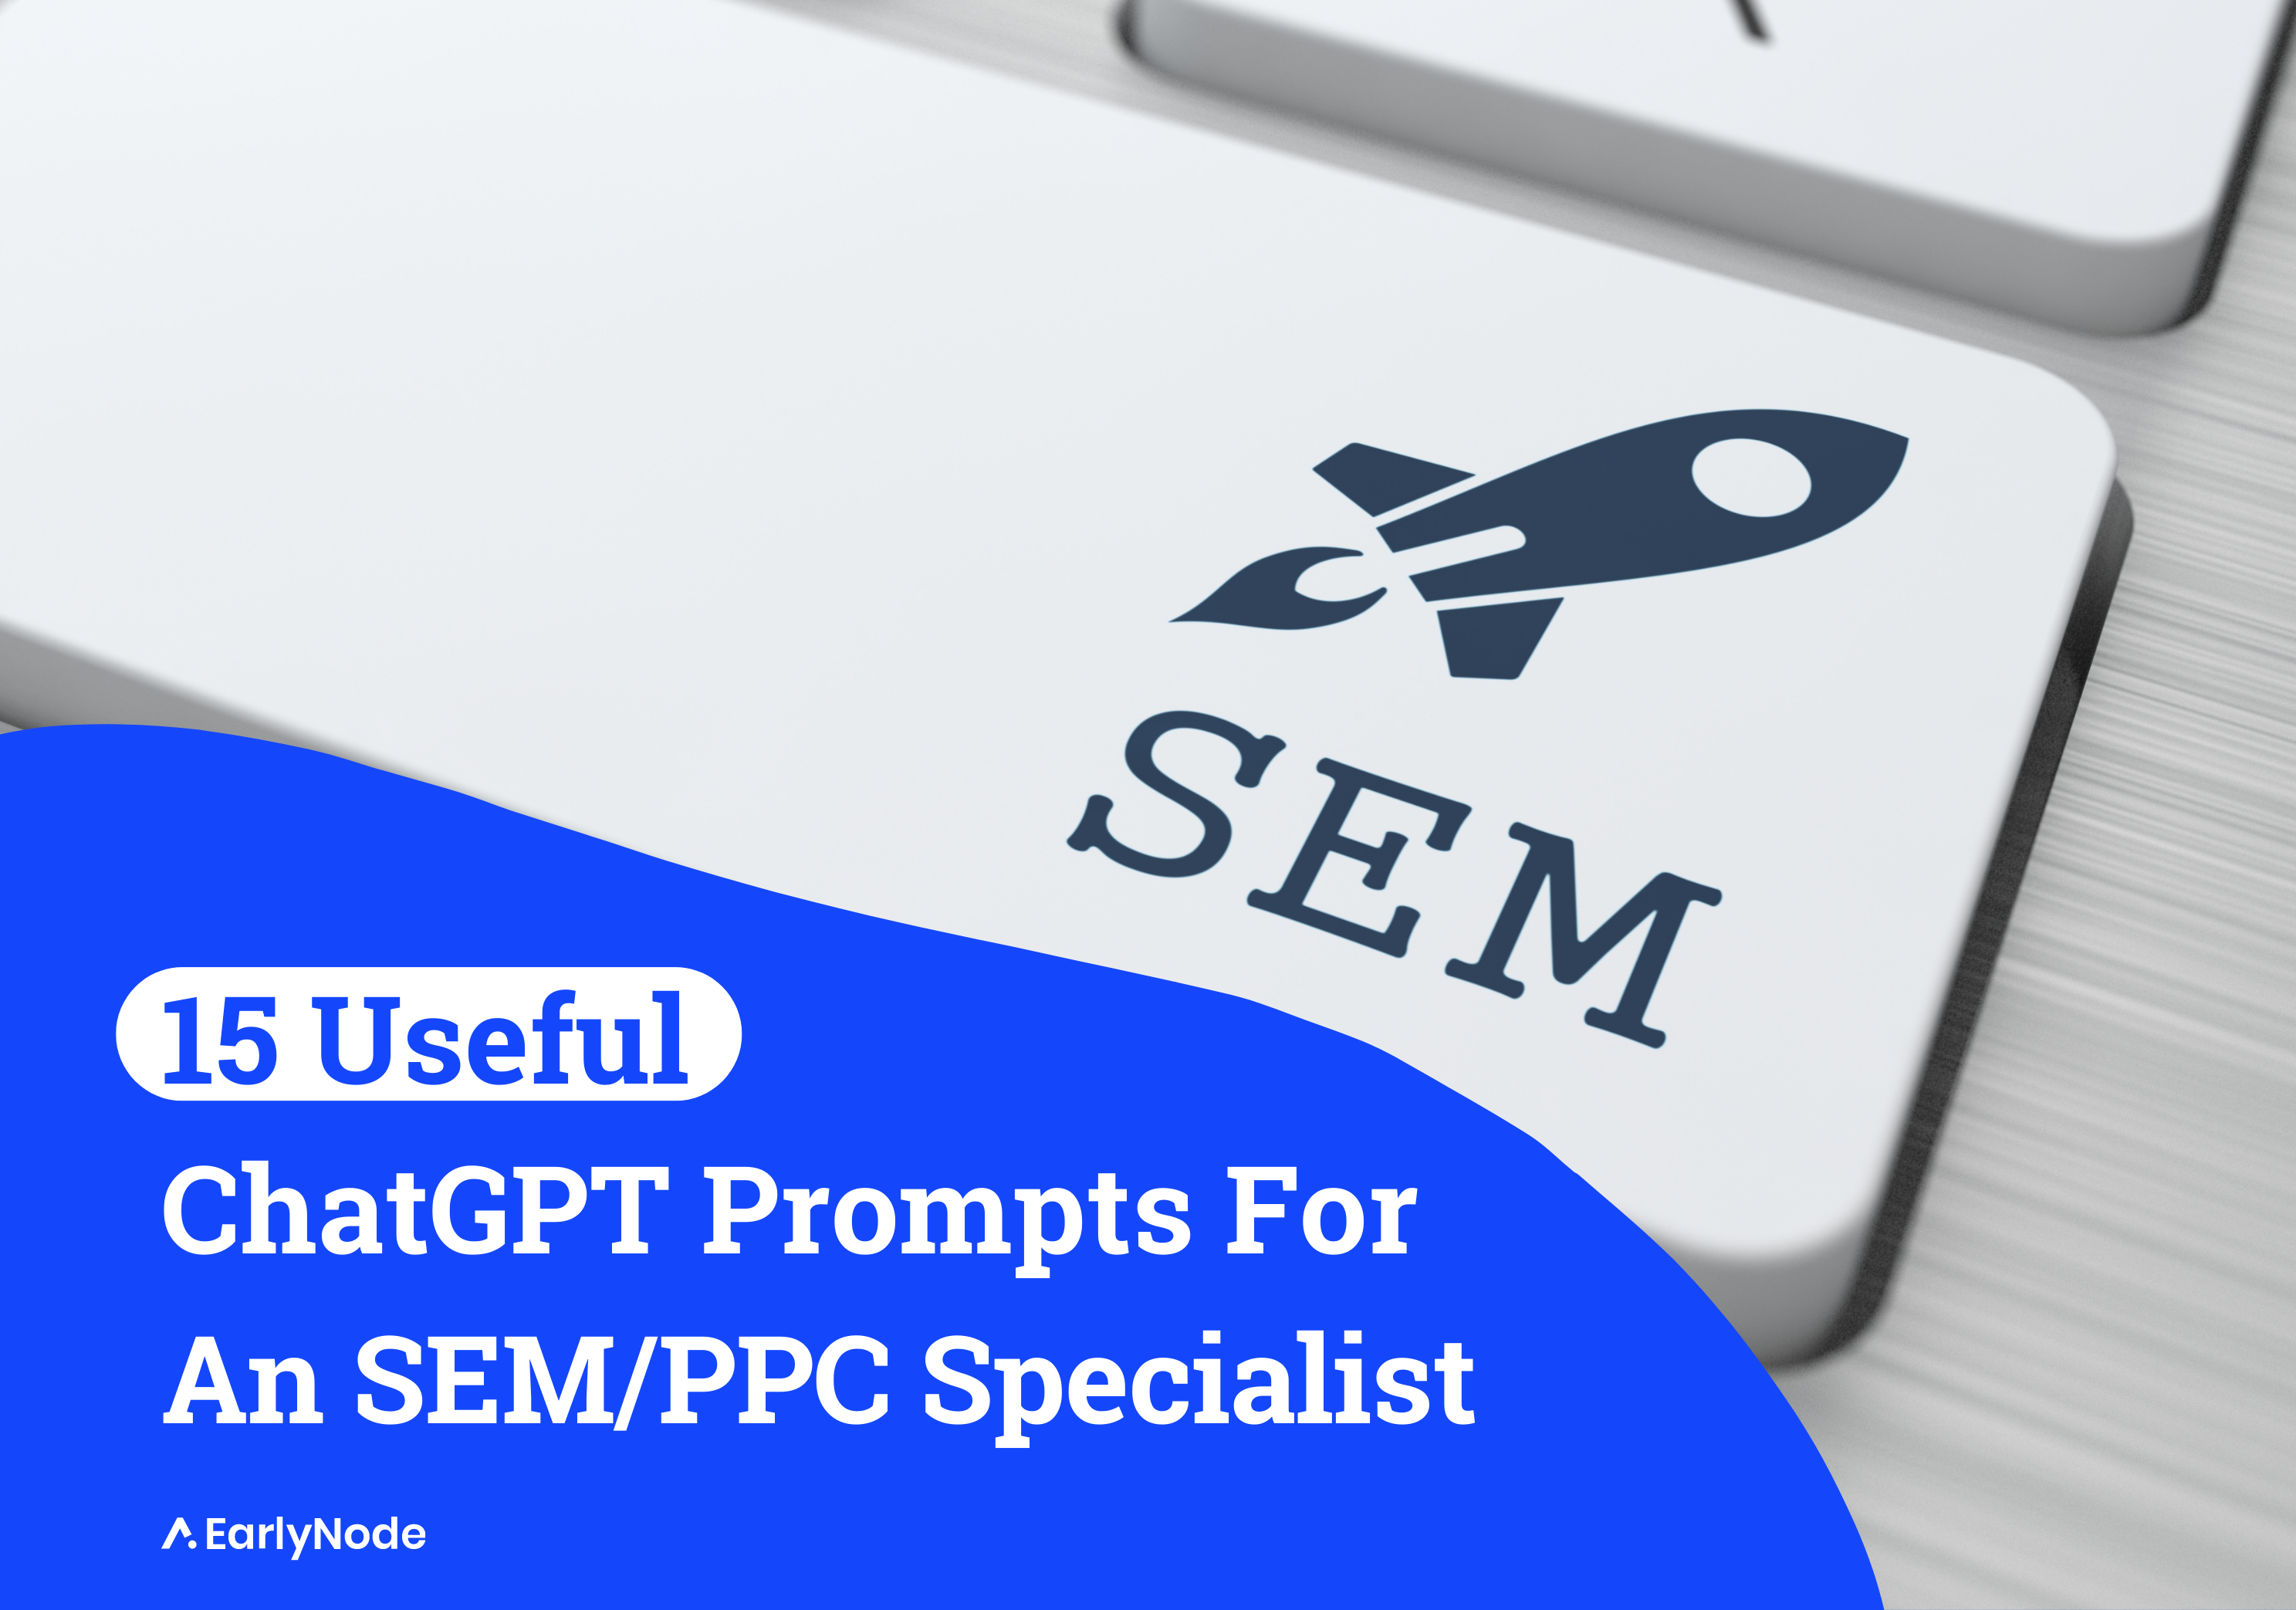 15 Useful ChatGPT Prompts for SEM Specialists